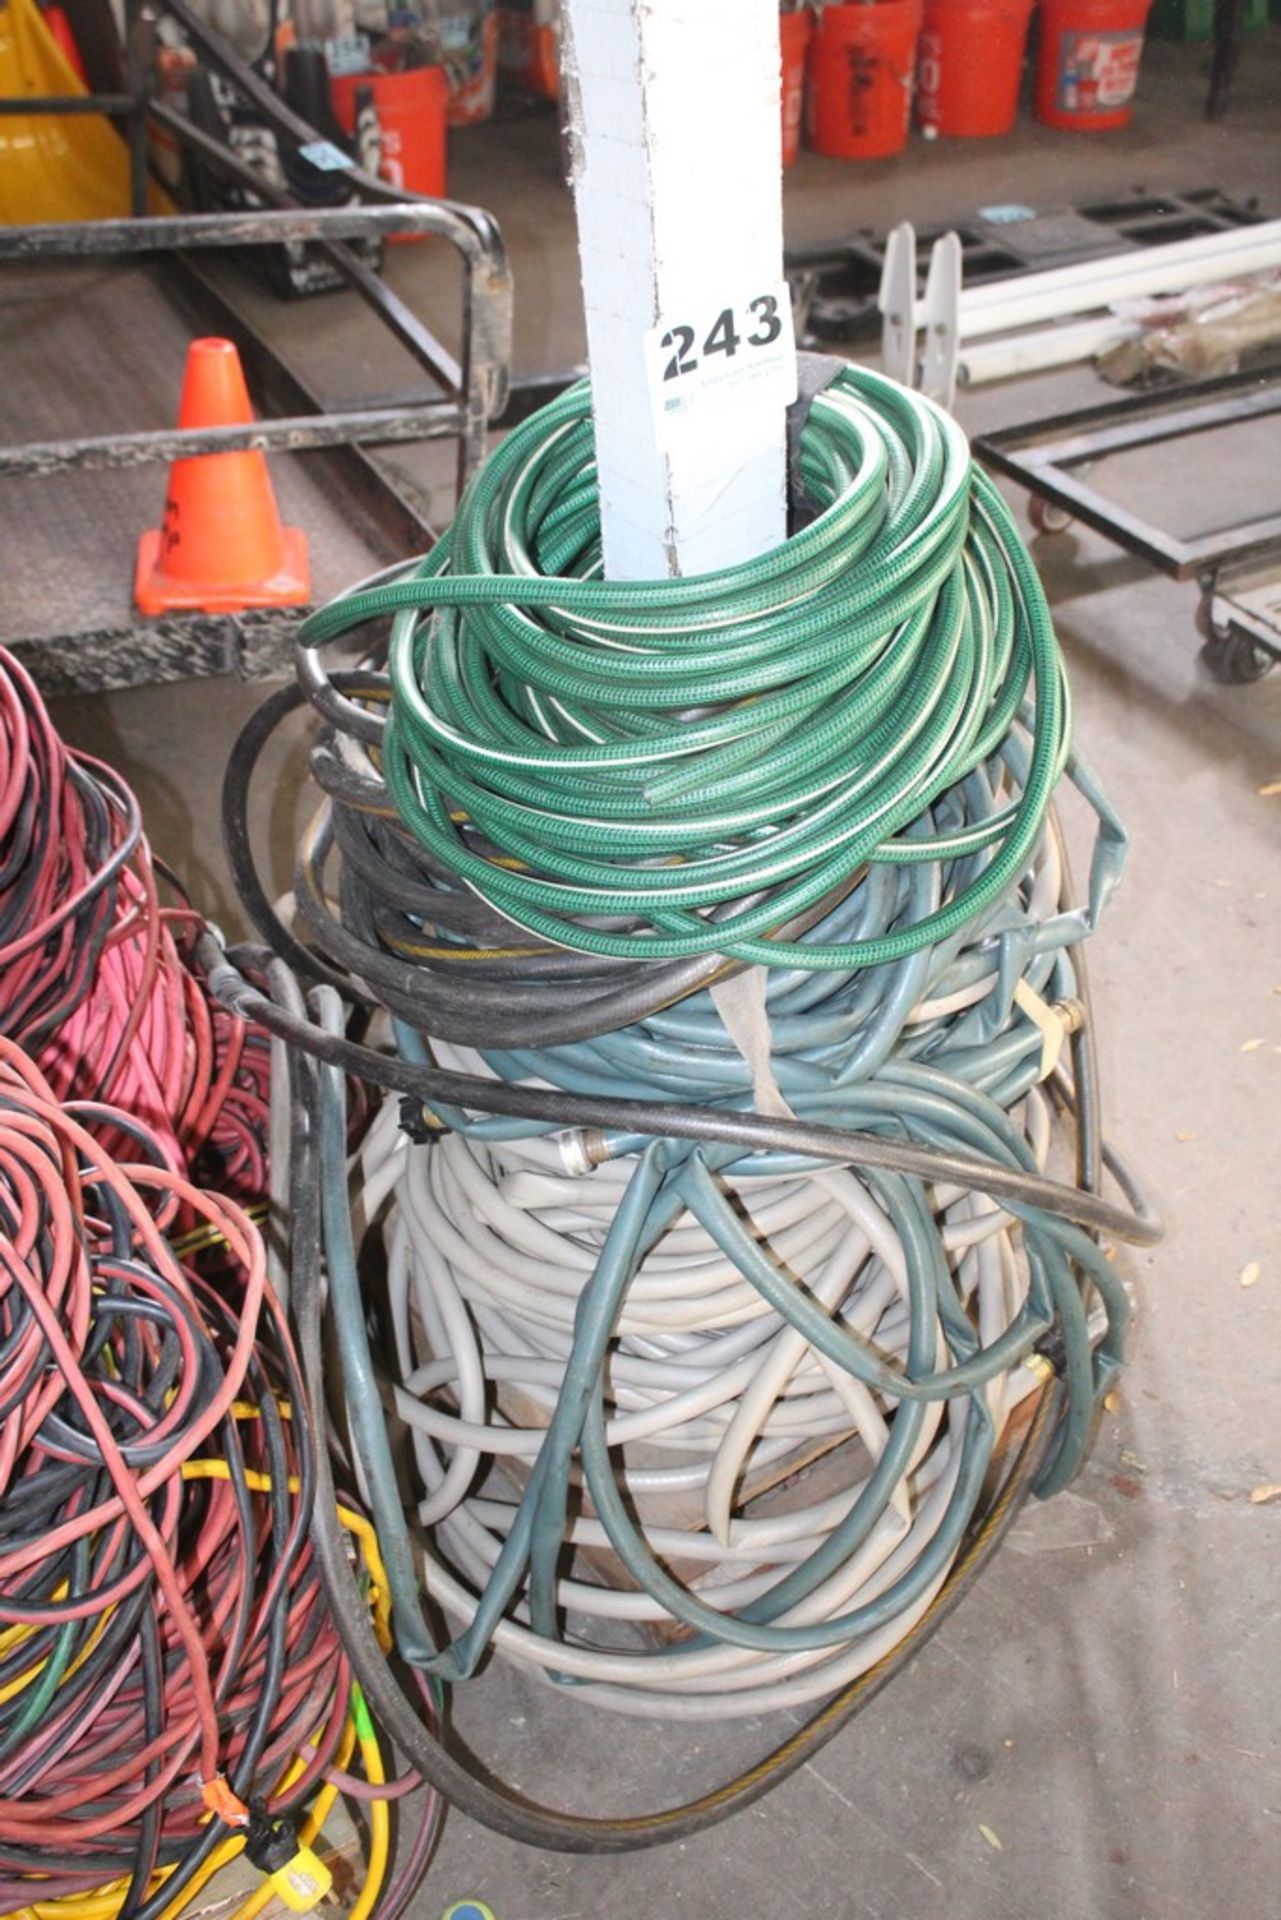 LARGE QUANTITY OF WATERING HOSE